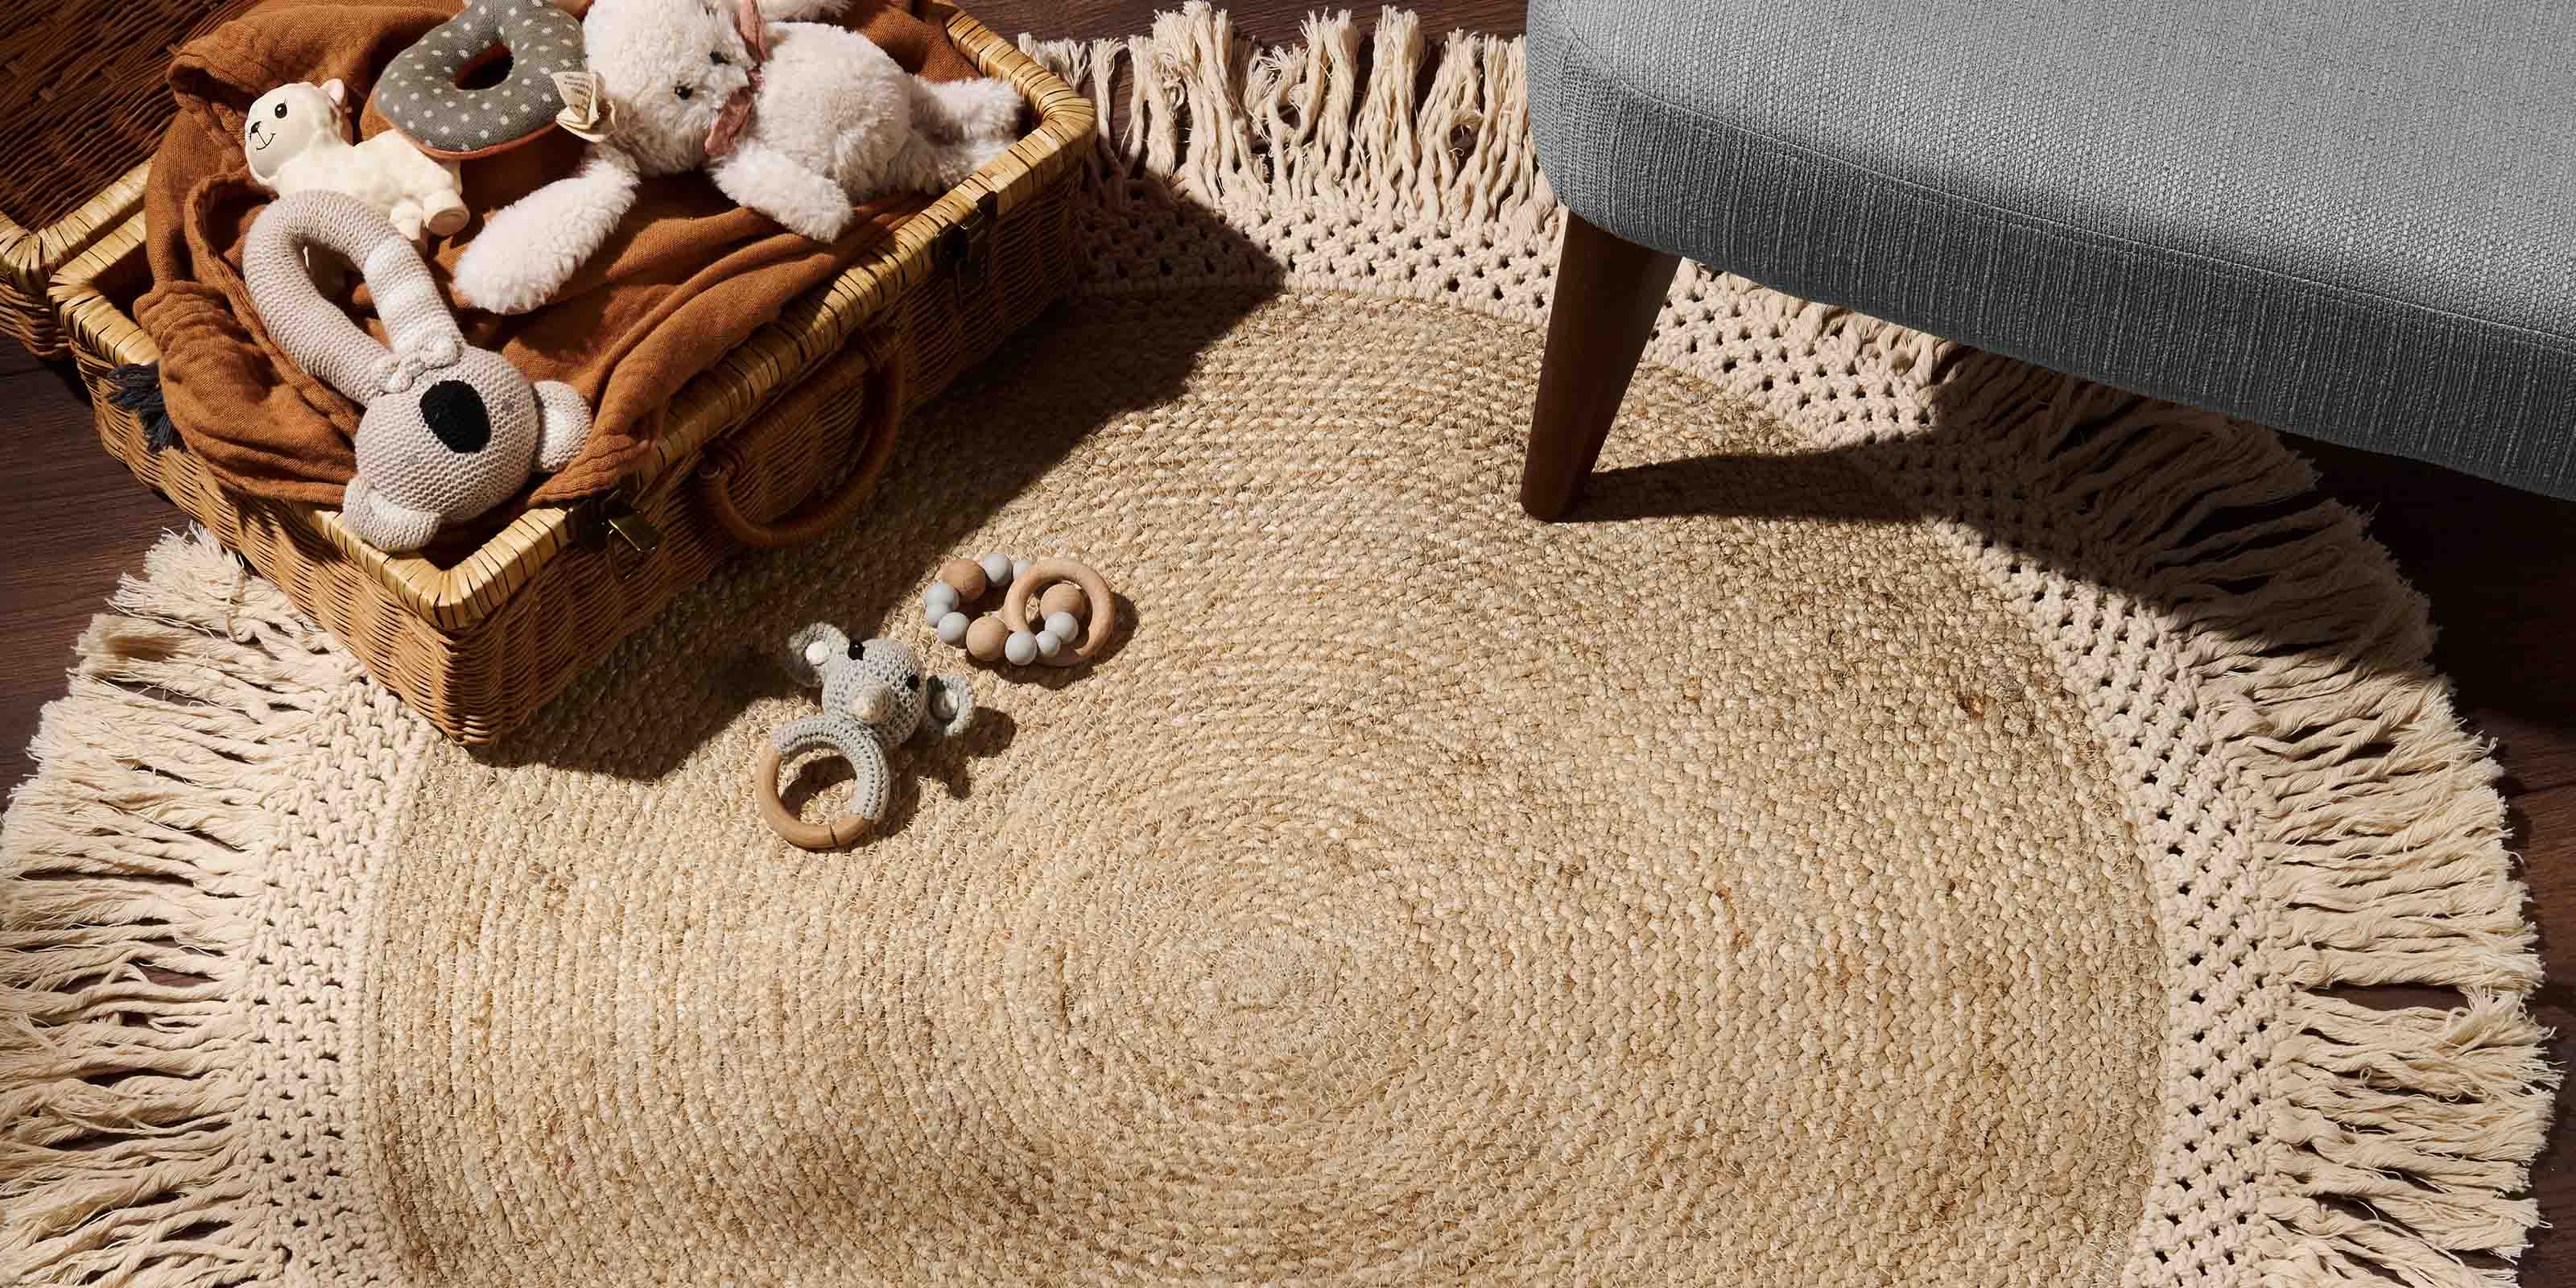 Handmade jute and macrame braided rug with a basket of toys open on top, with a stool 